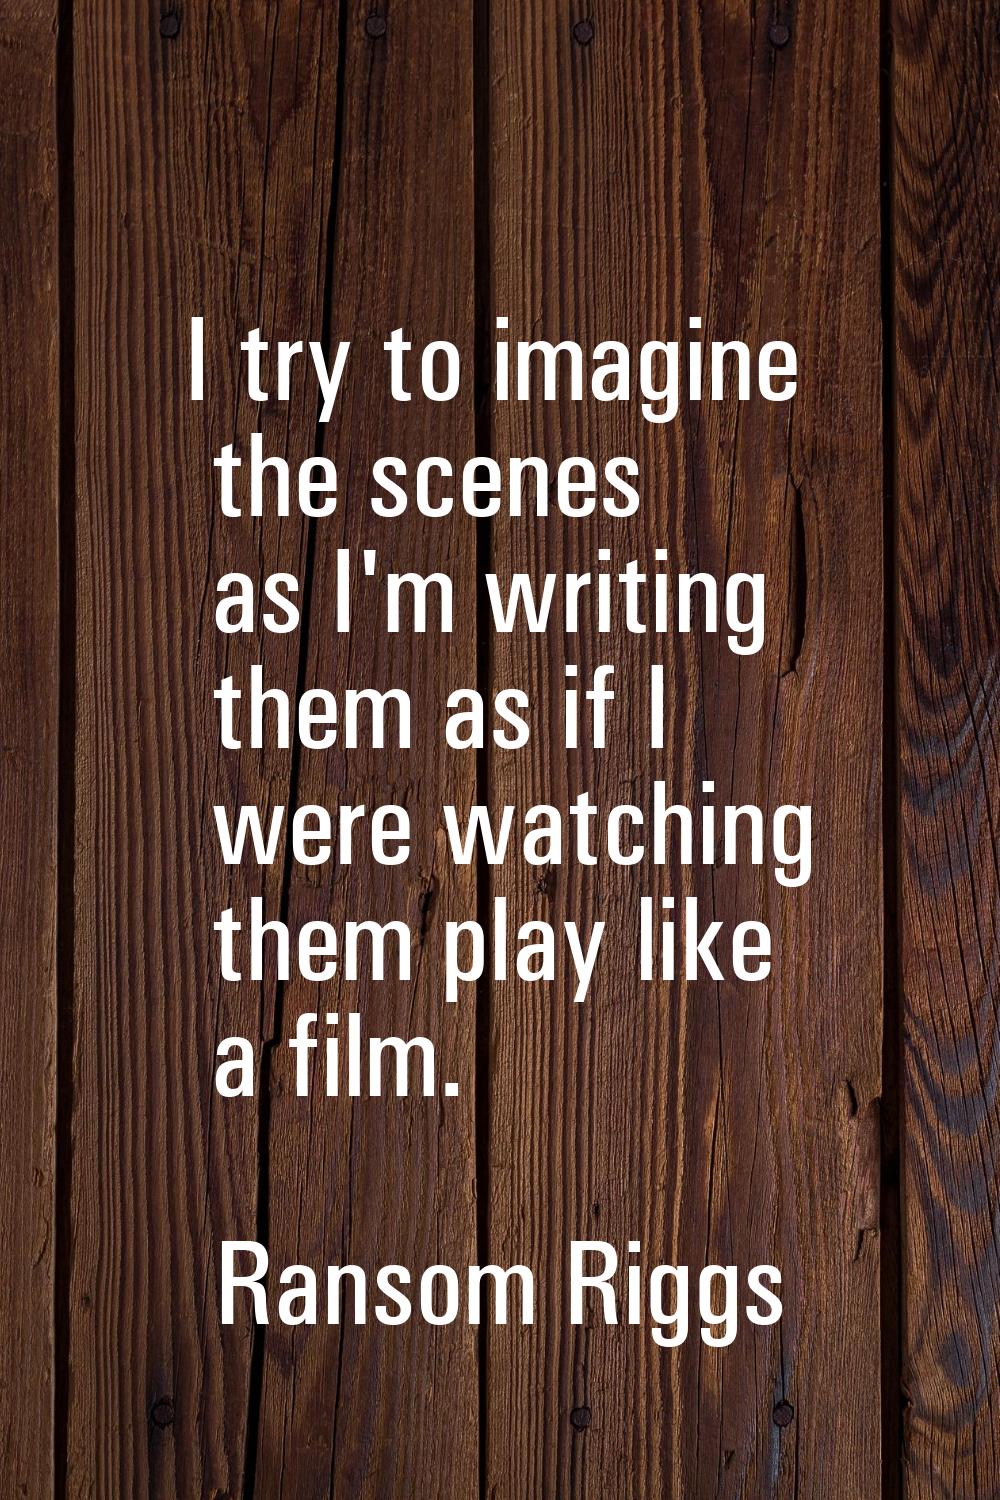 I try to imagine the scenes as I'm writing them as if I were watching them play like a film.